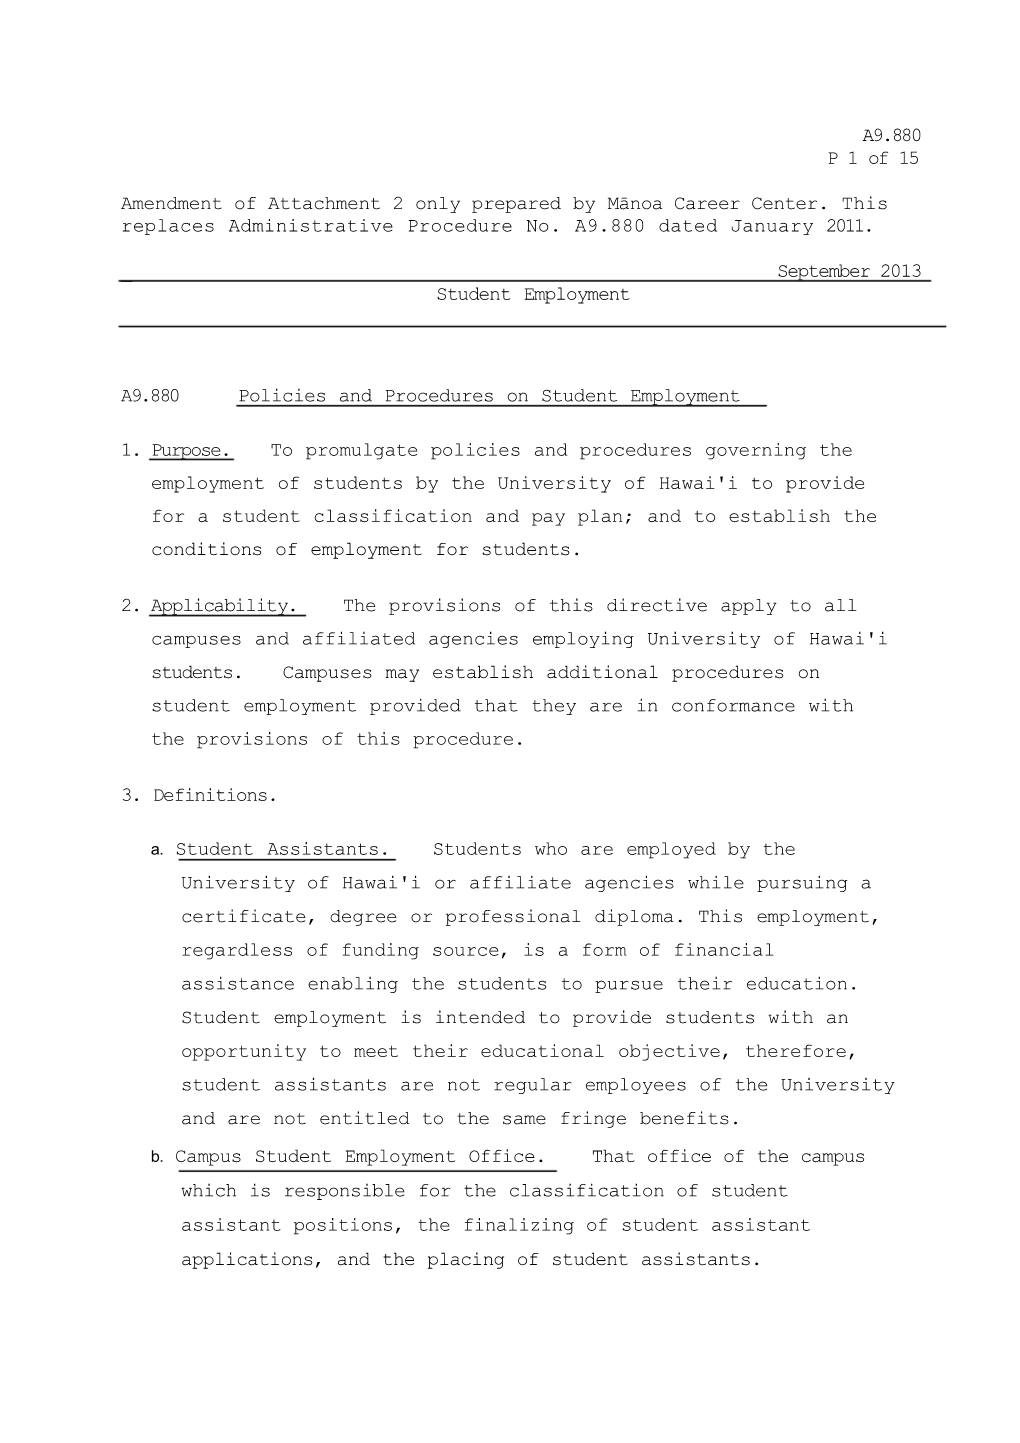 A9.880 P 1 of 15 Amendment of Attachment 2 Only Prepared By